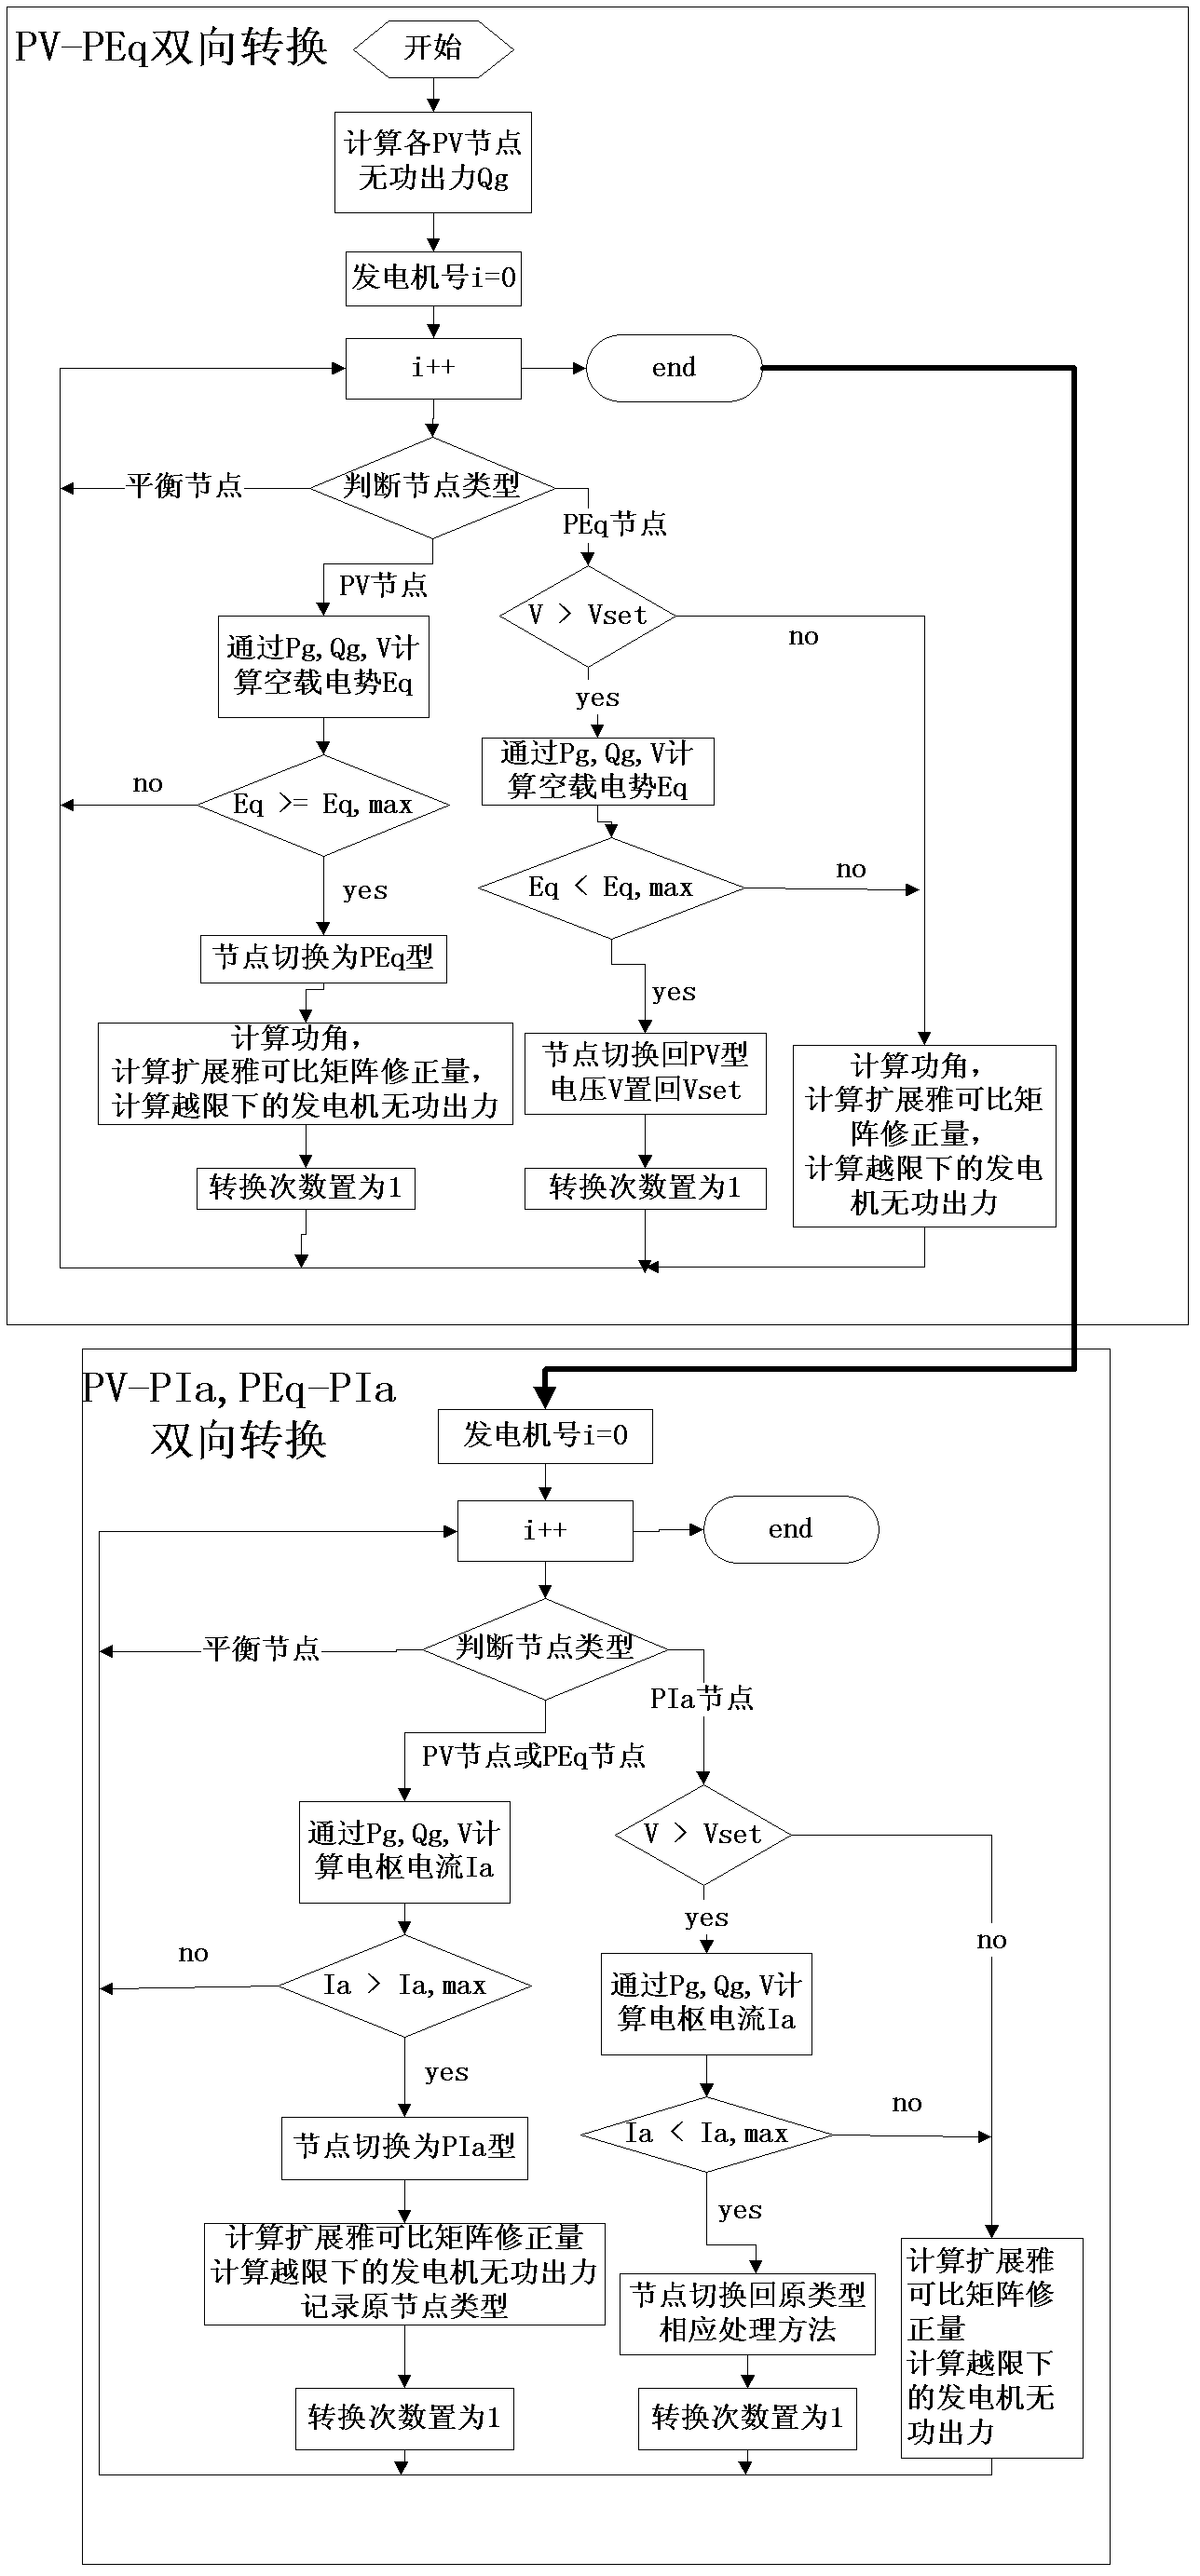 Continuation power flow algorithm considering field current constraint and armature current constraint of power generator